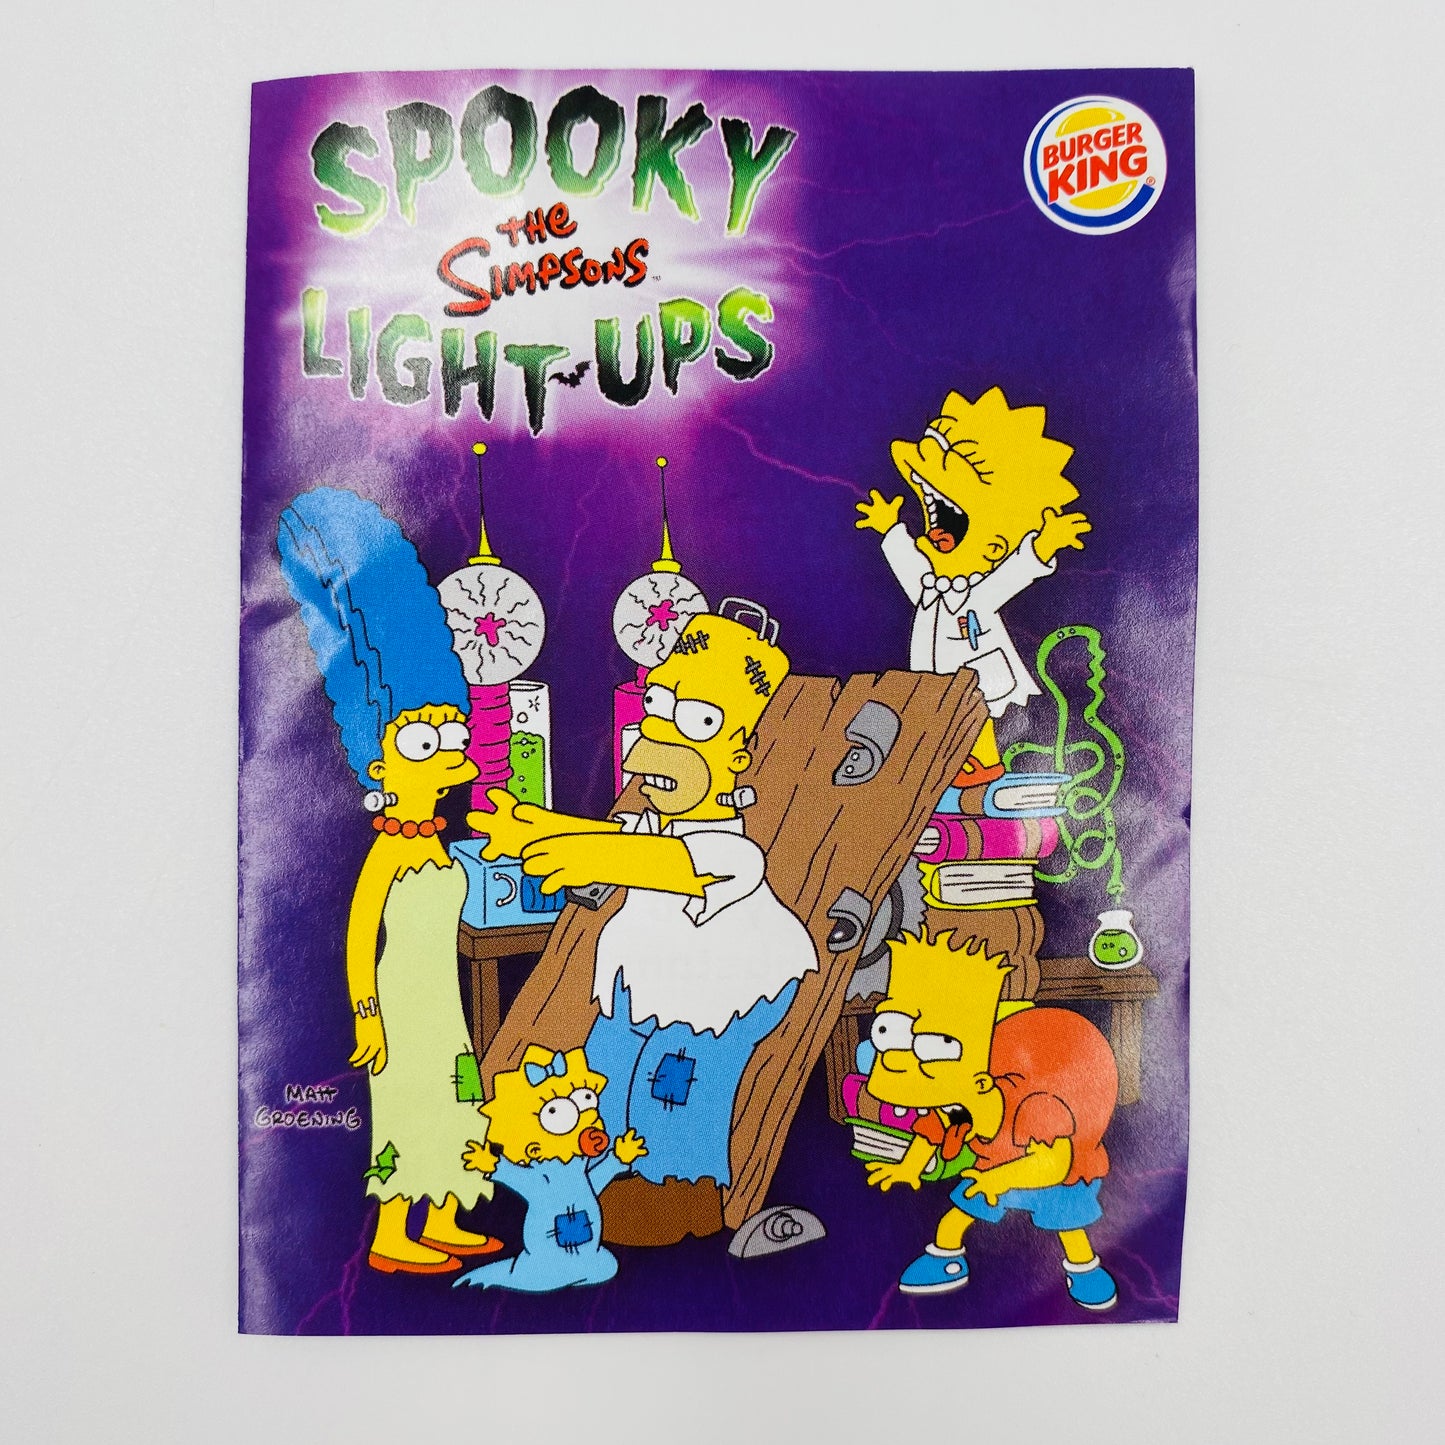 The Simpsons Spooky Light-Ups Barney Burger King Kids' Meals toy (2001) loose